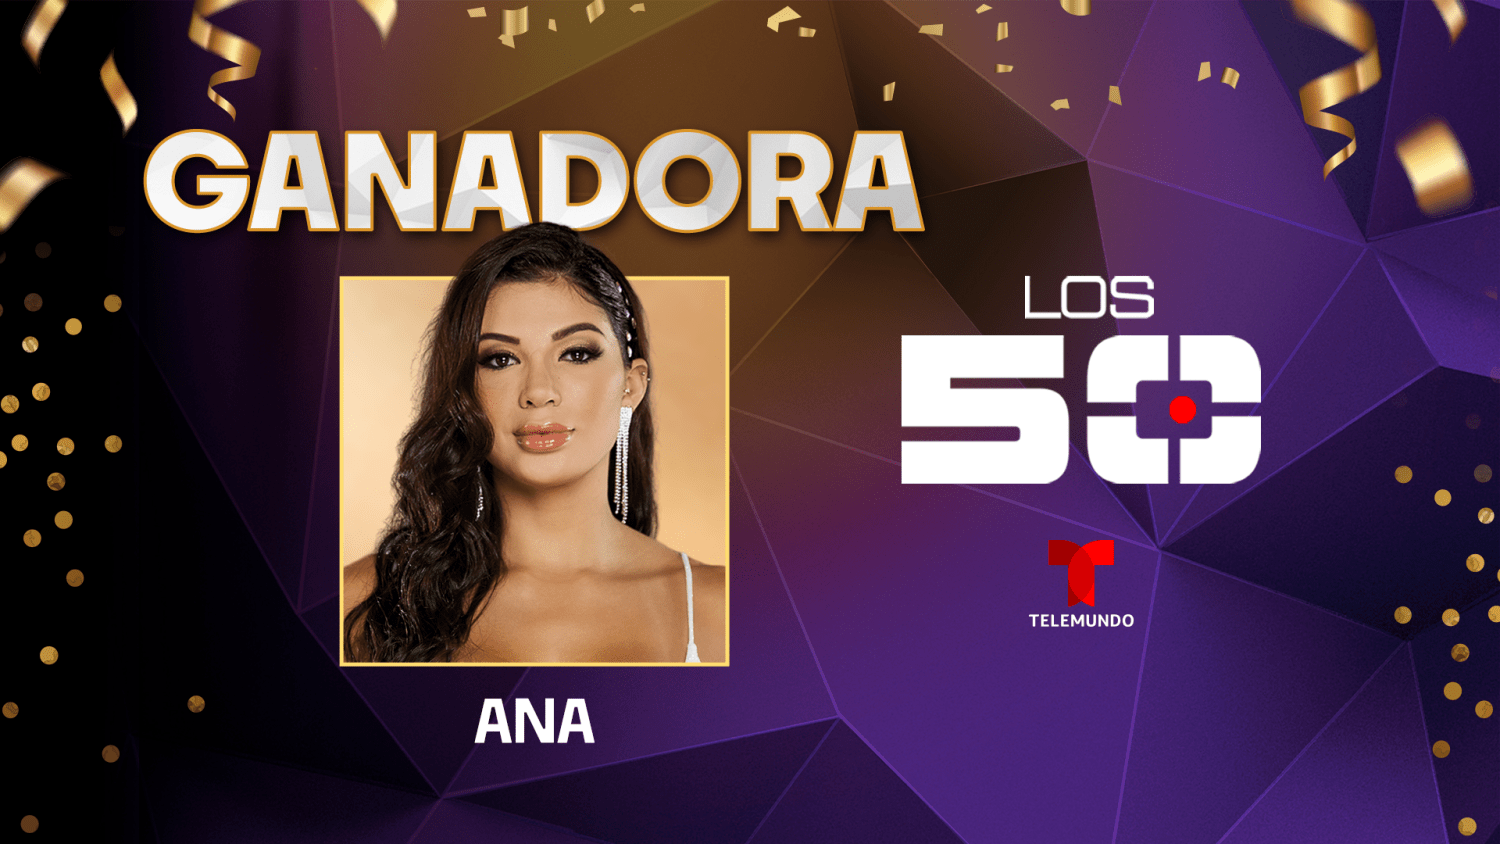 Ana Barra was crowned ‘Los 50’ winner at the finale on Telemundo, taking home $347,560.